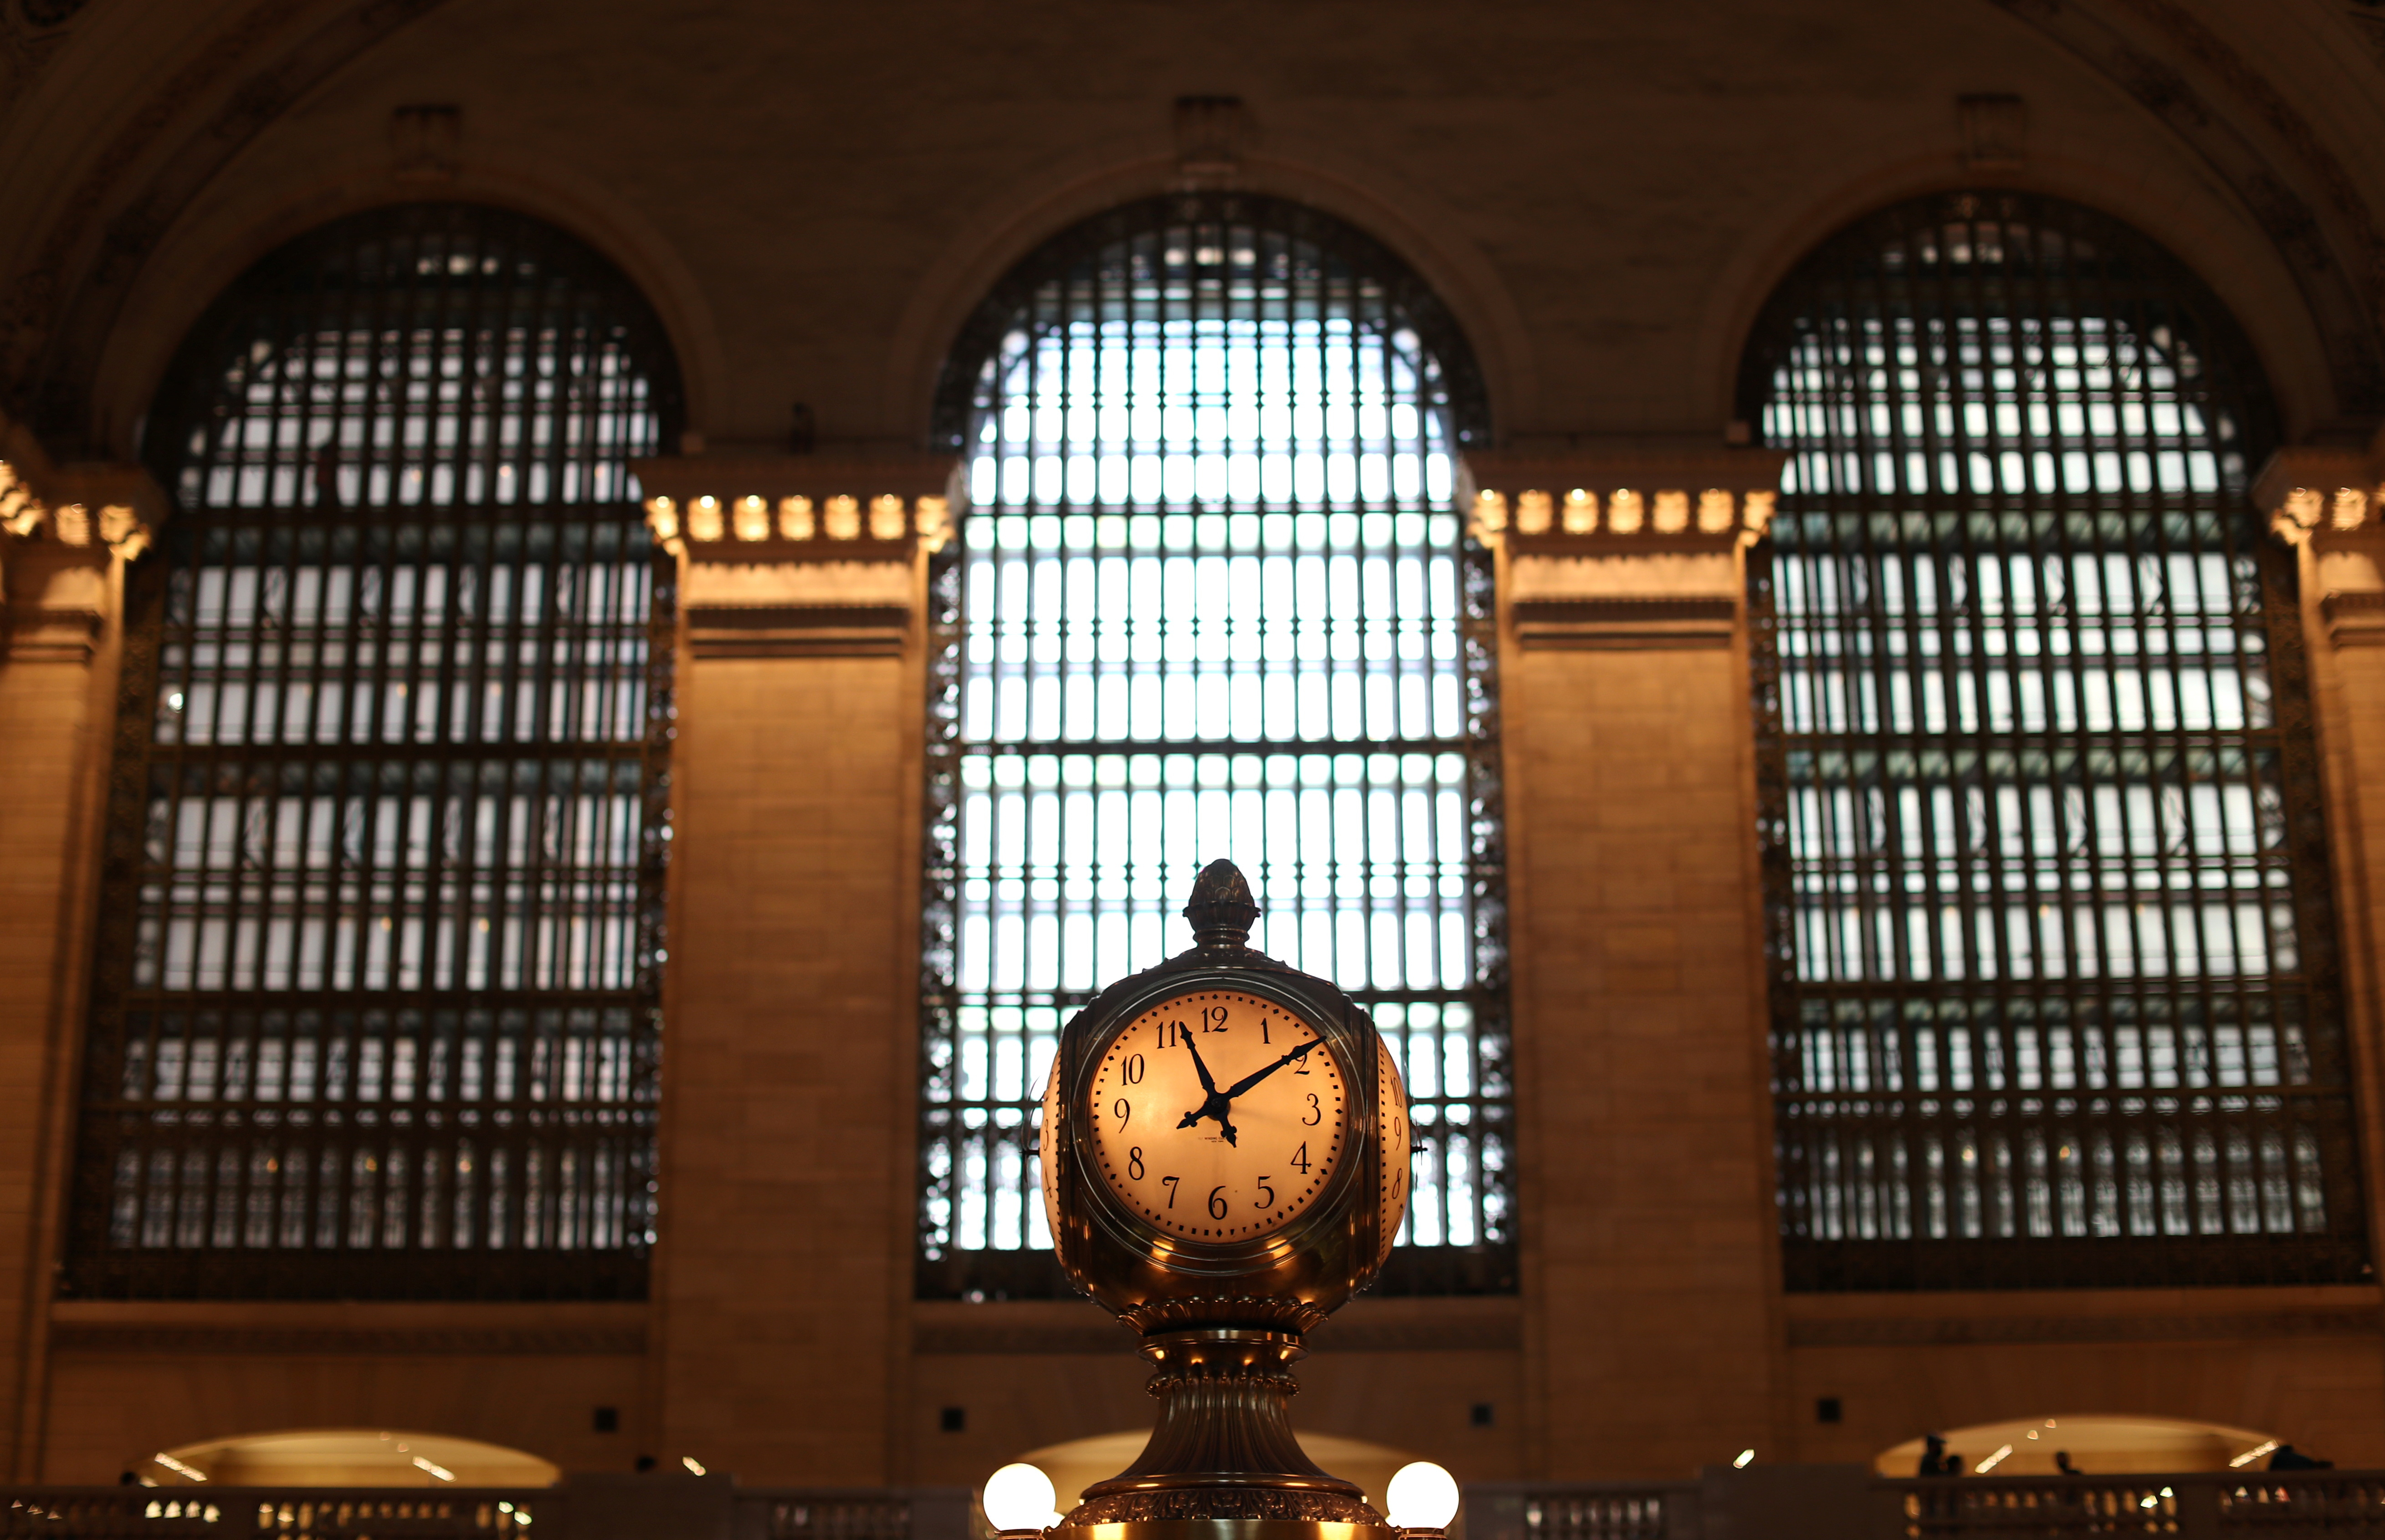 Grand Central Terminal Clock inside Grand Central Terminal train station in New York